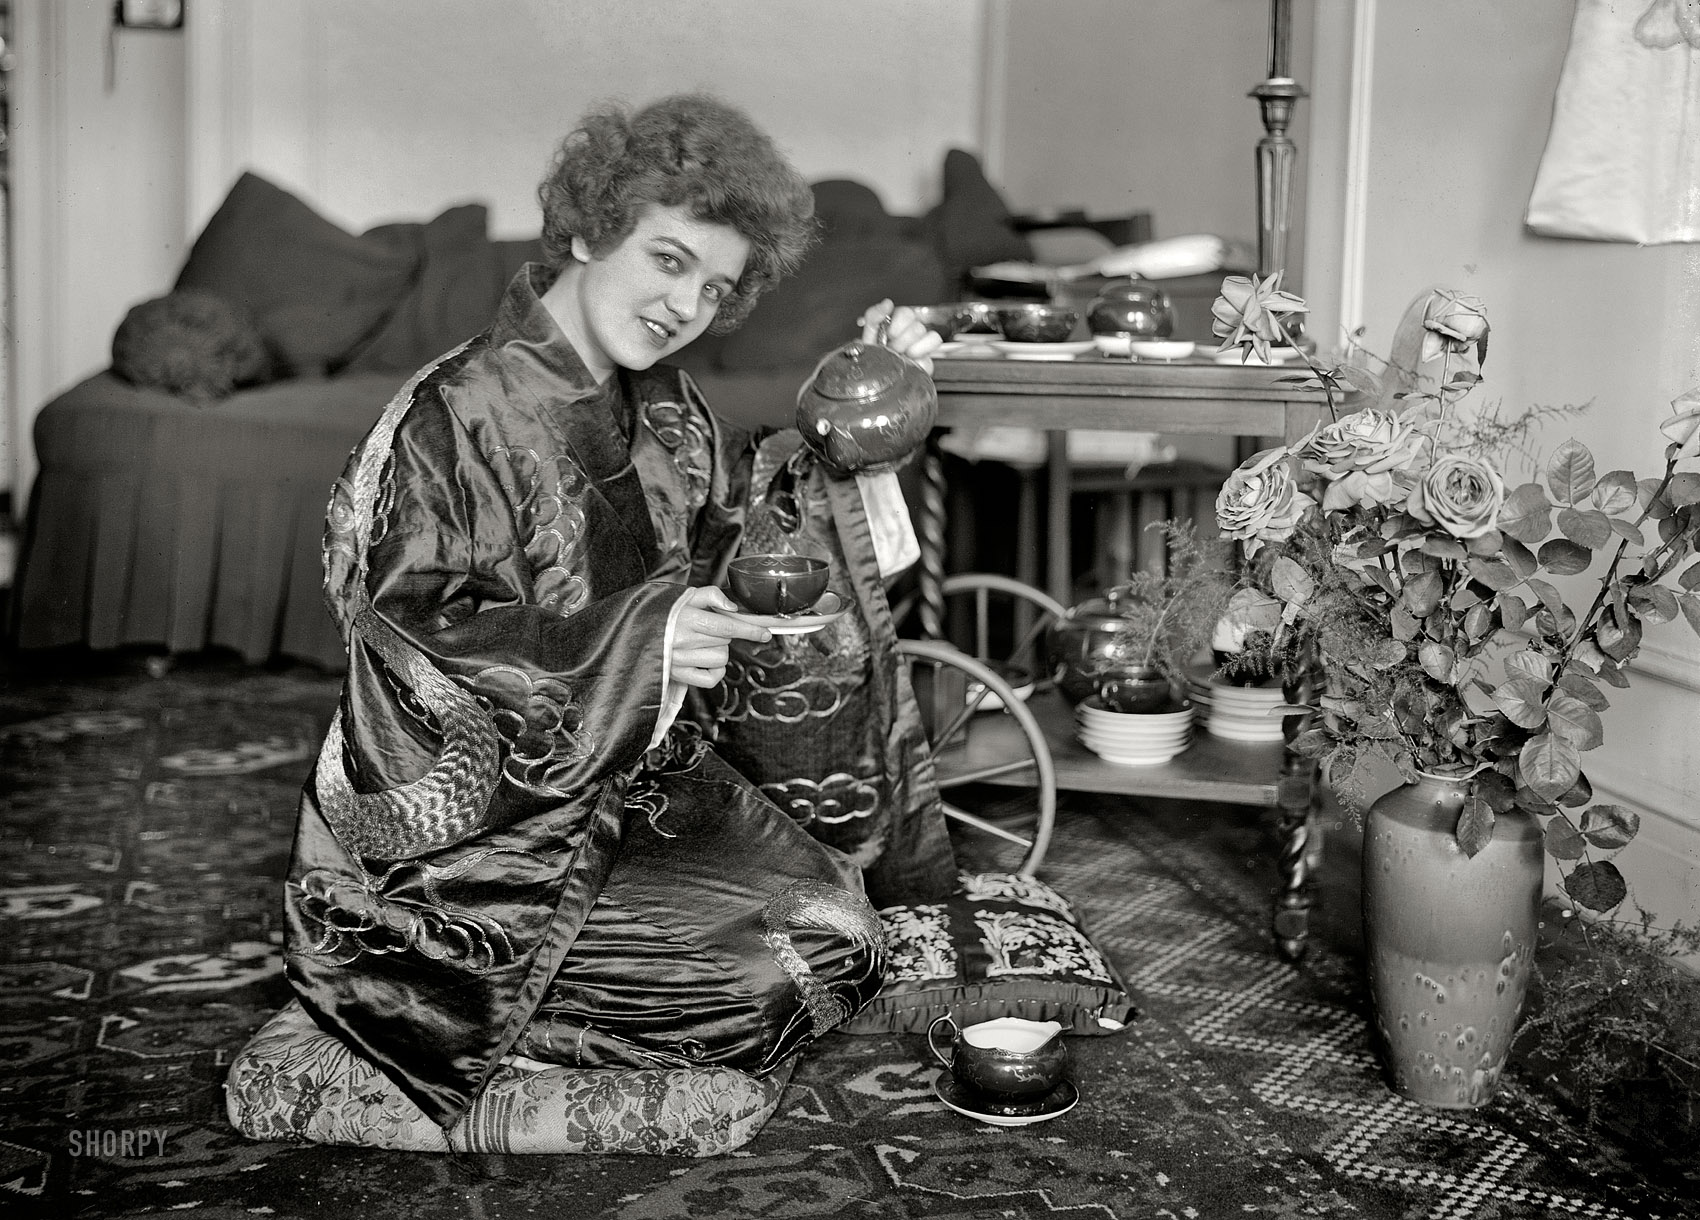 New York. May 21, 1921. "Kopernak in kimono." The Russian-born stage actress Galina Kopernak about to pour. Bain News Service glass neg. View full size.